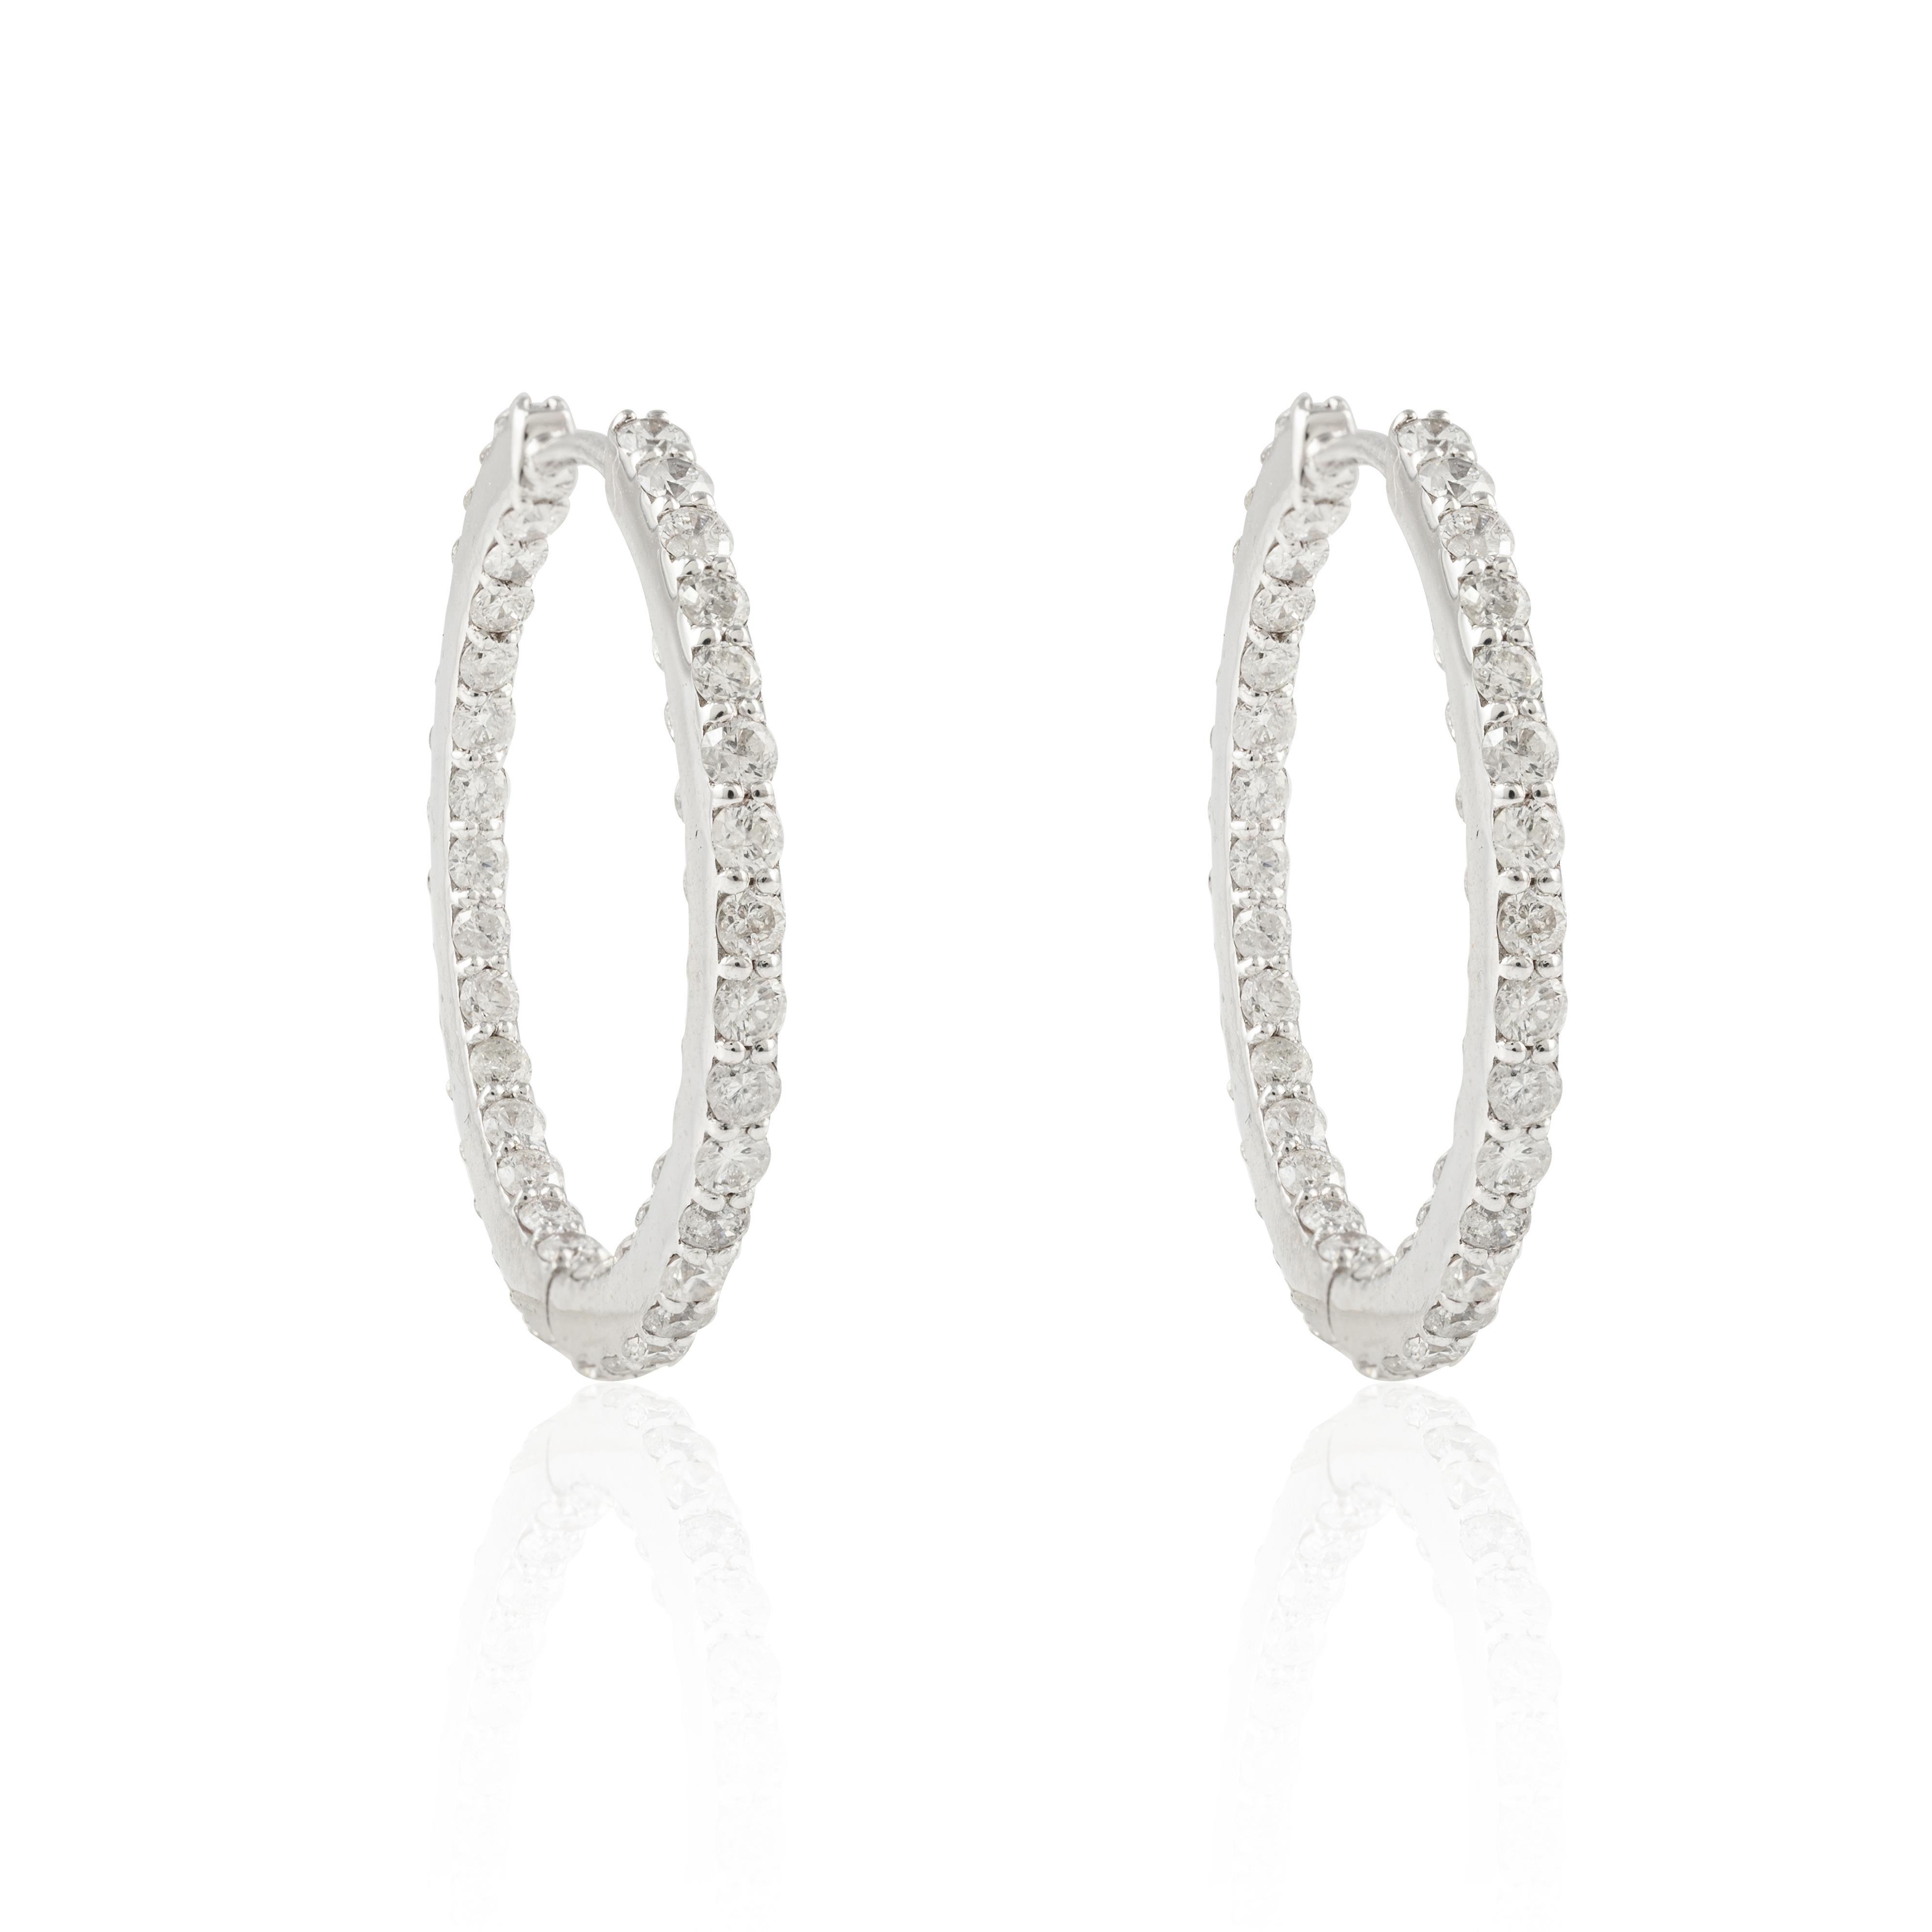 2.8 Carat Hoop Diamond Earrings For Women Studded in 18k Solid White Gold In New Condition For Sale In Houston, TX